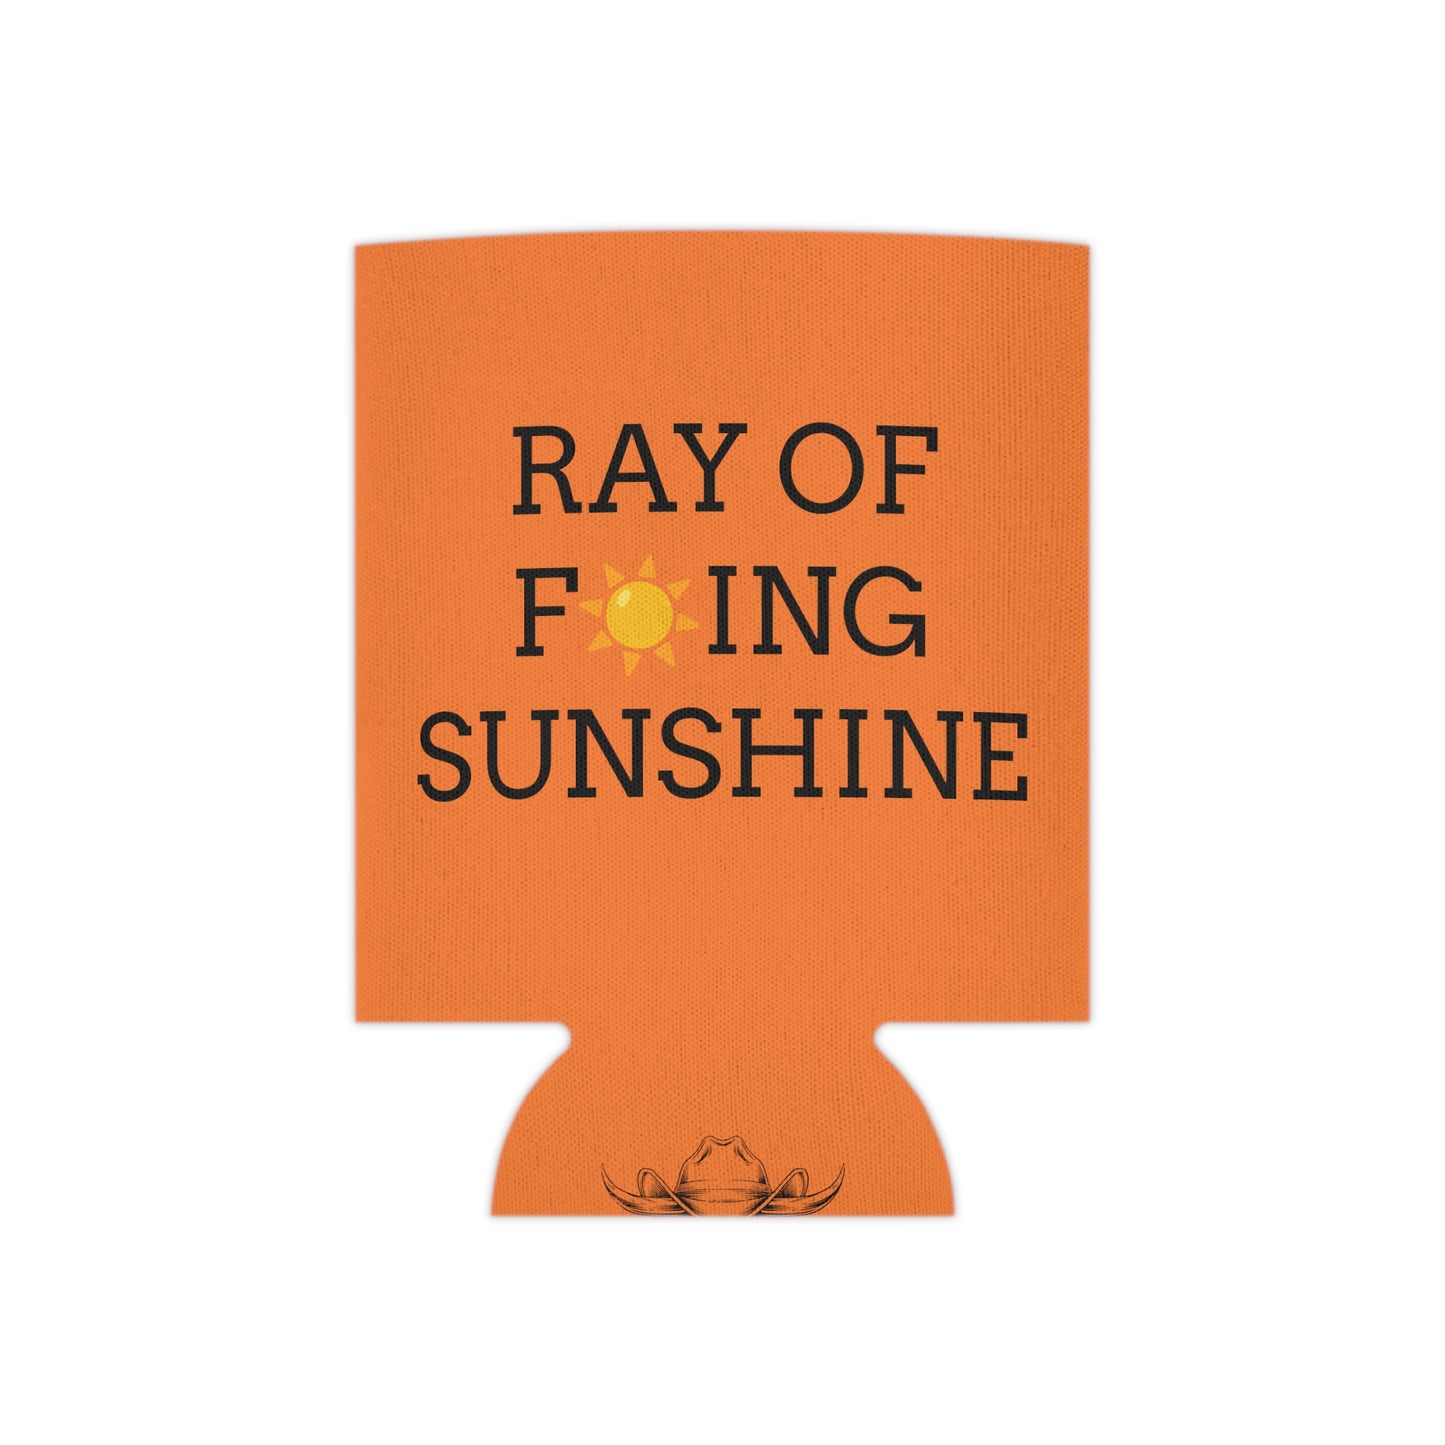 Ray Of F-ing Sunshine Can Cooler